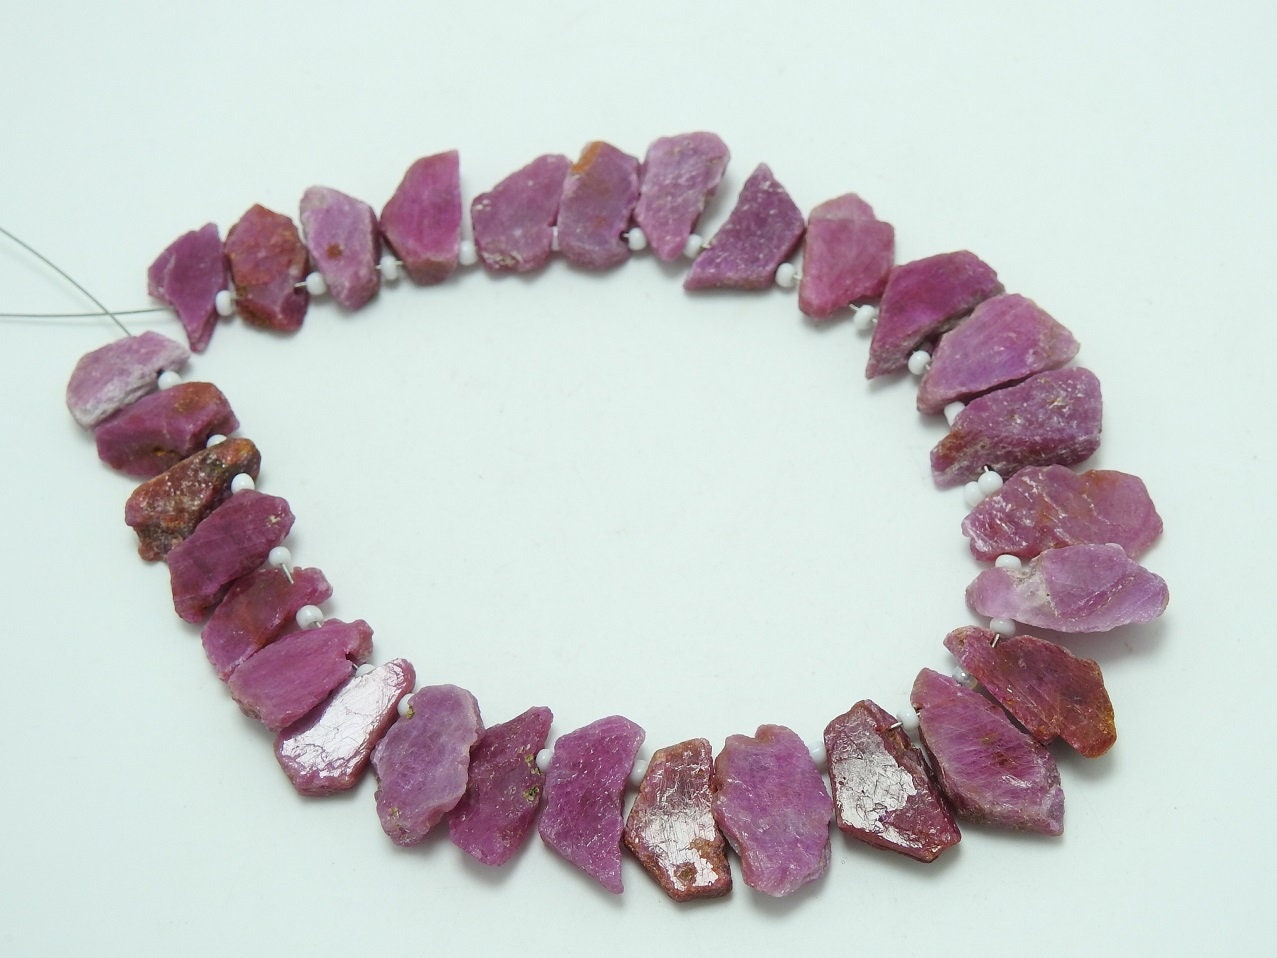 African Ruby Natural Chrystal Rough Slice,Slab,Stick,Nuggets,Loose Raw,8Inchs Strand 18X10To15X6MM Approx,Wholesale Price,New Arrival R4 | Save 33% - Rajasthan Living 16